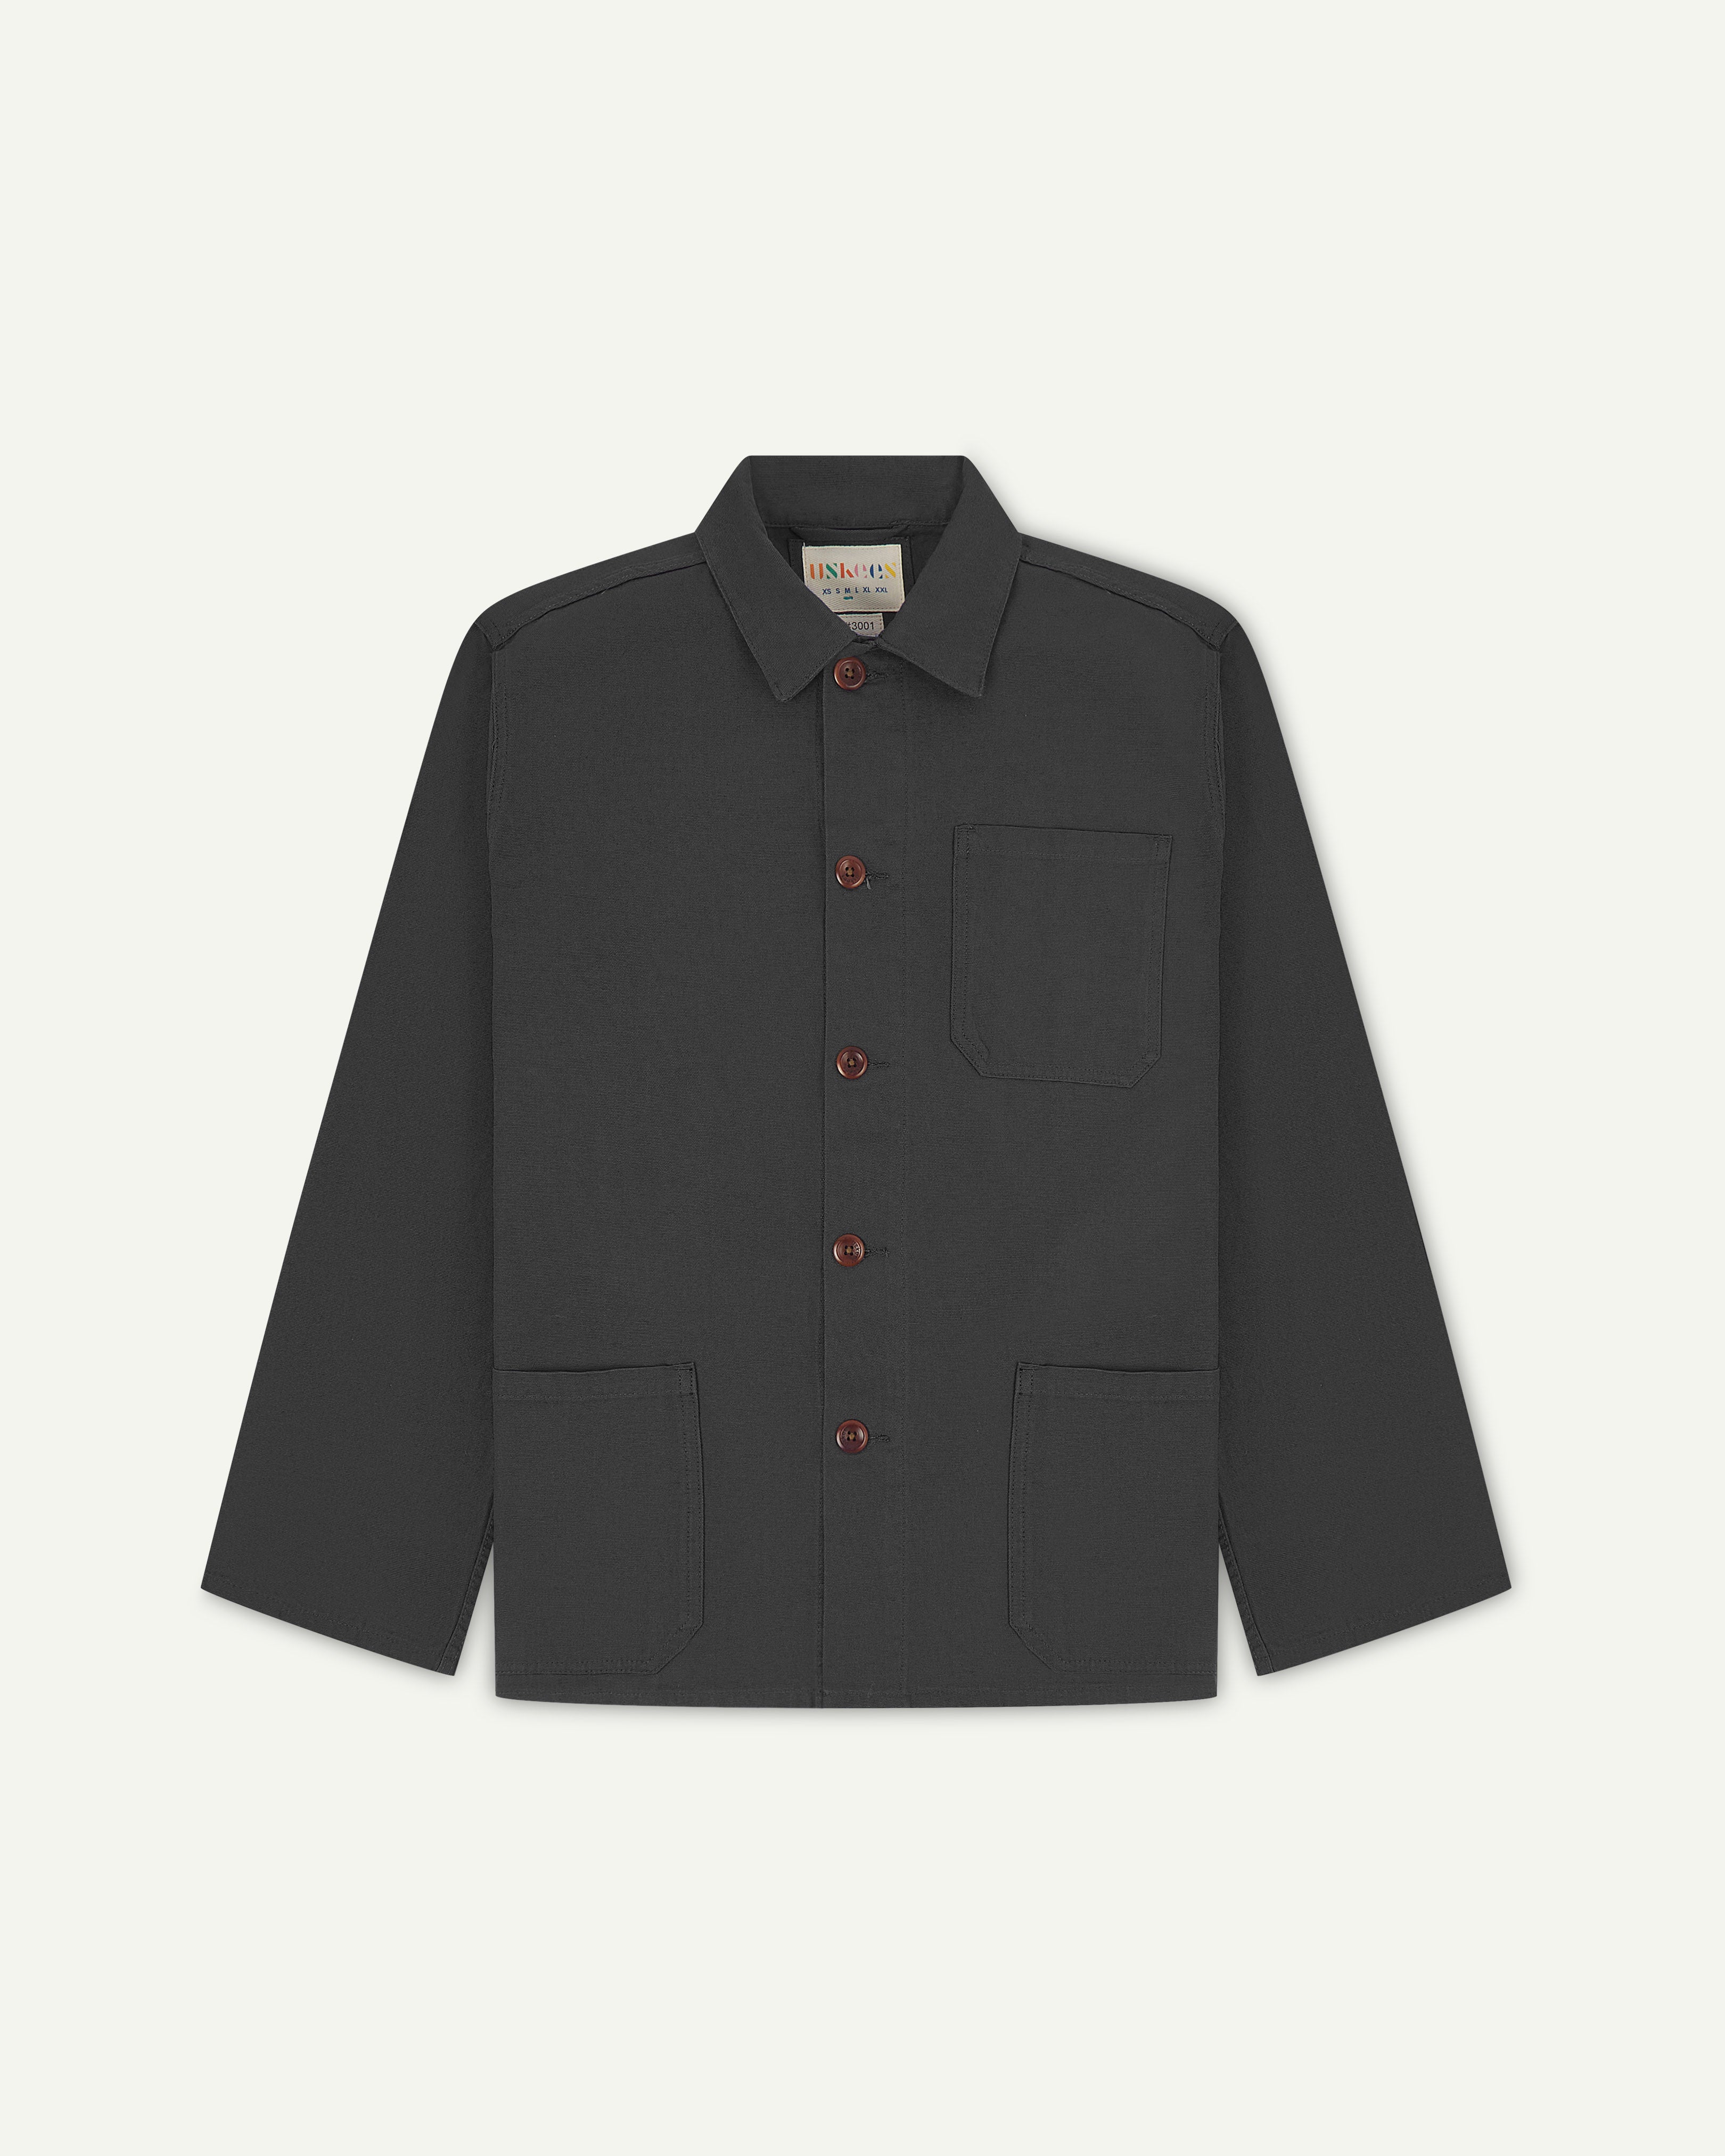 Flat shot of the front of a charcoal grey/black men's overshirt with buttons done up and showing uskees neck label